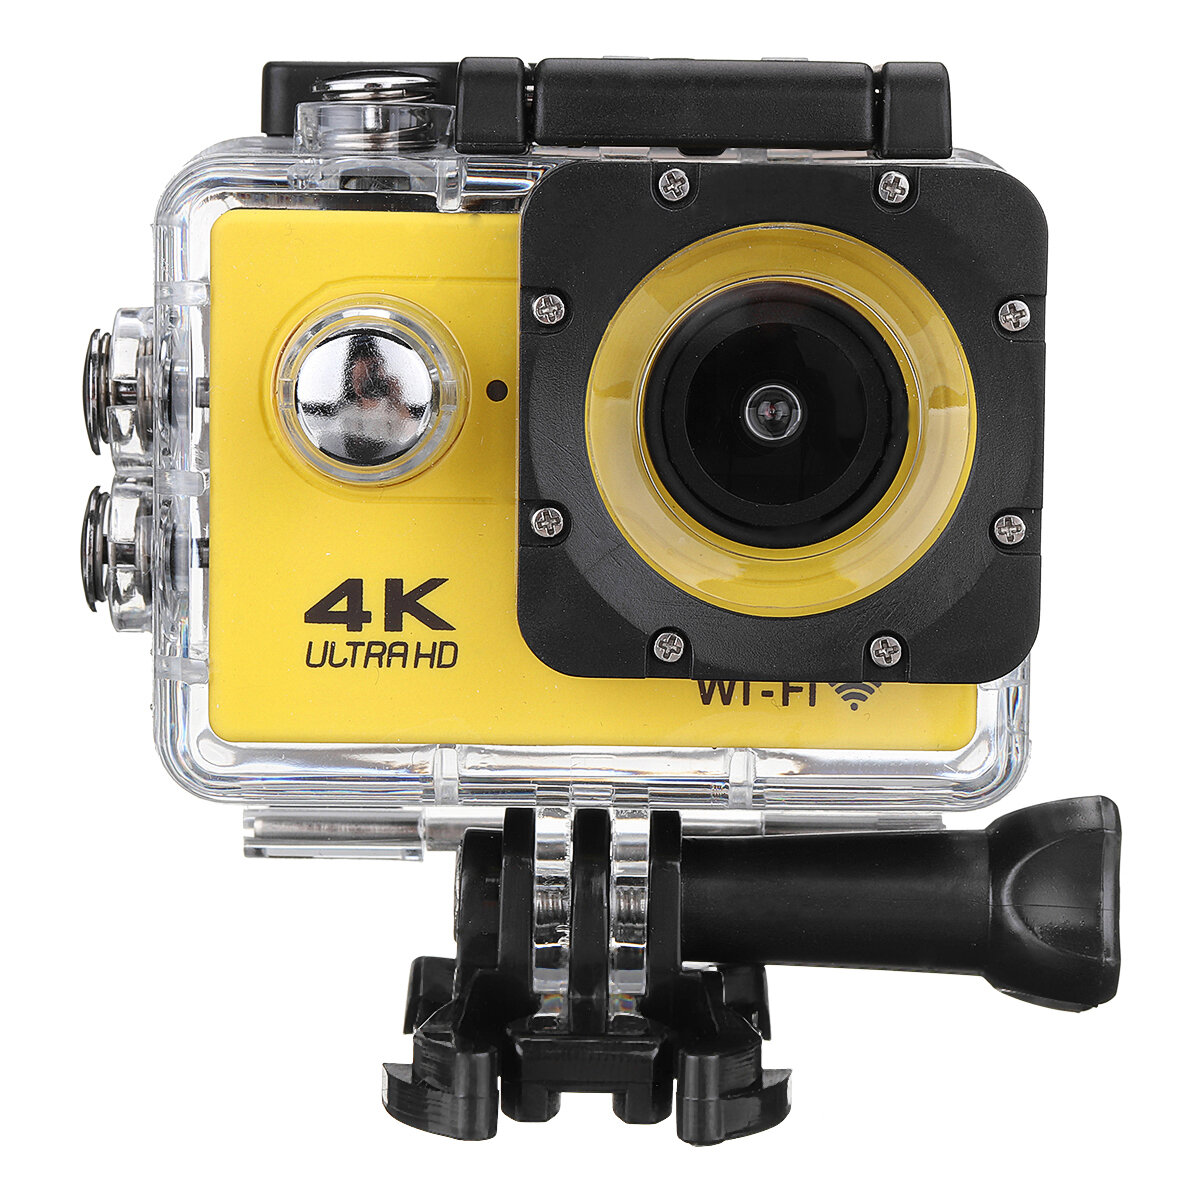 4K Action Camera WiFi Sports Camera Ultra HD 30M 170 Wide Angle Waterproof DV Camcorder with EIS Gyroscope Dual Anti Shake